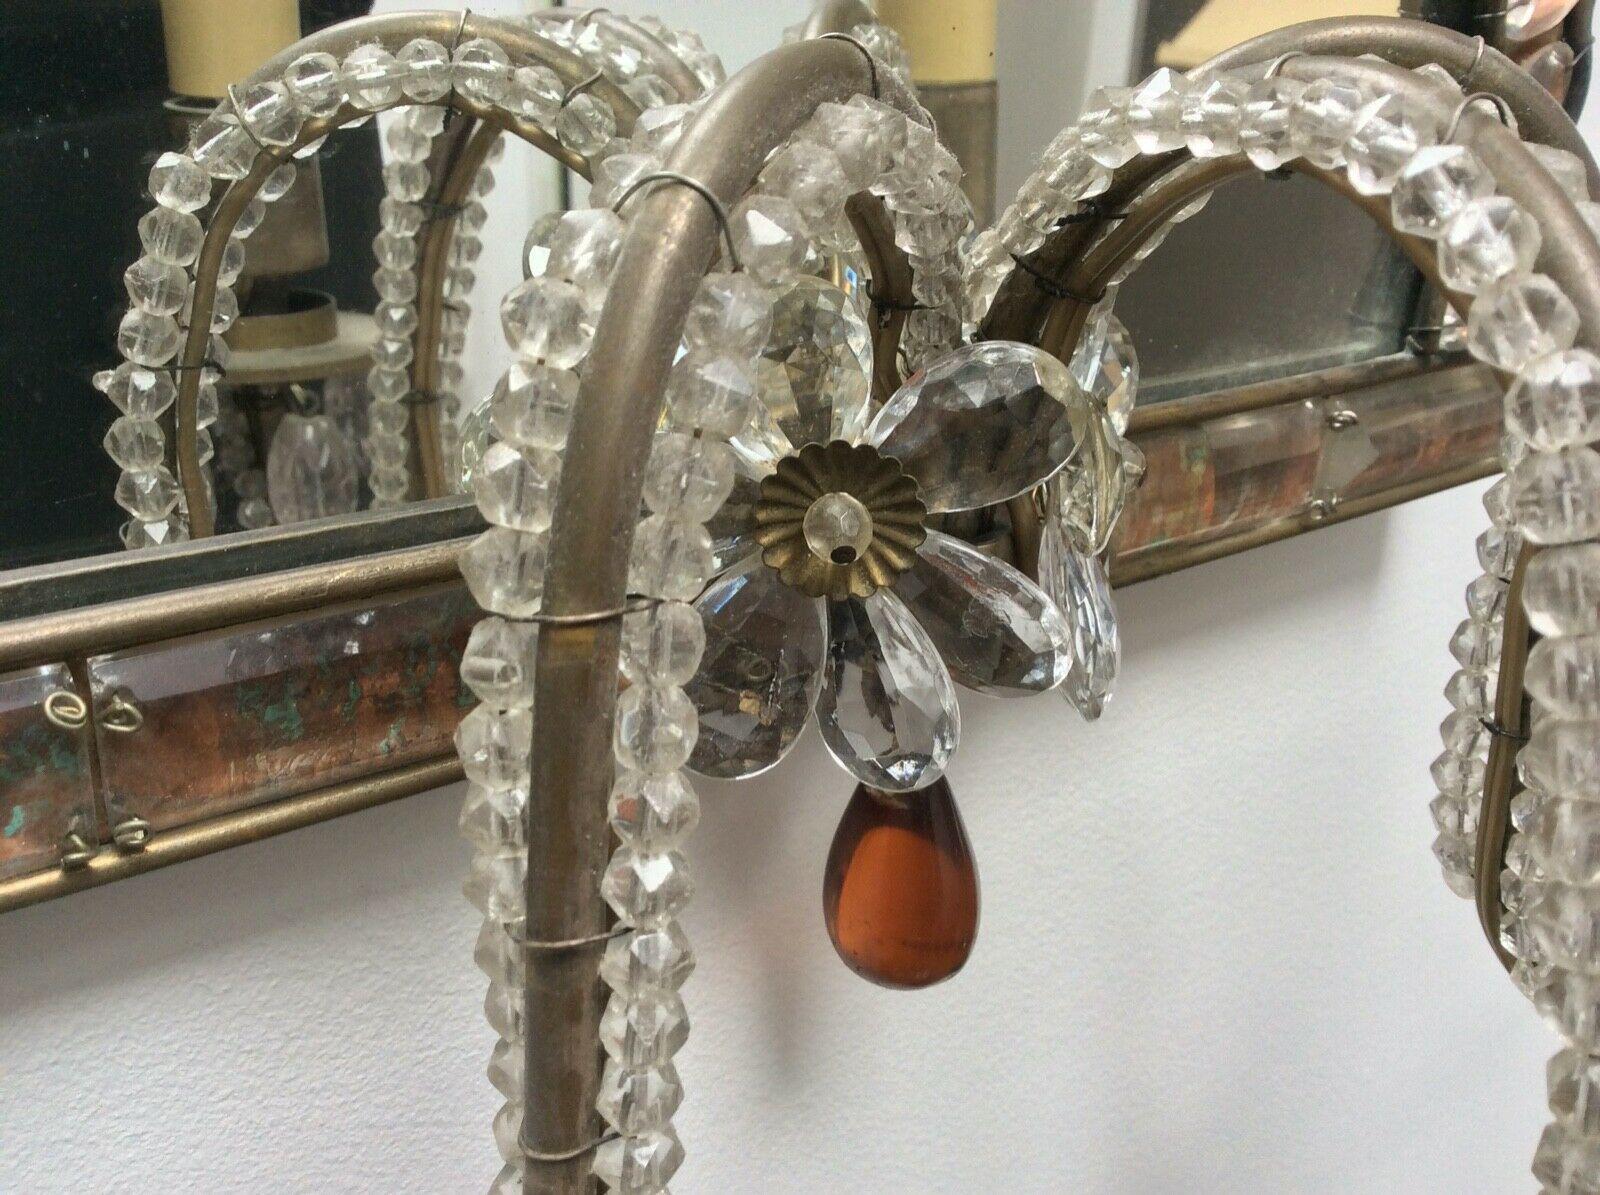 Rare 1920s French Art Deco Crystal Maison Bagues Wall Mirror Sconce / Wall Lamp For Sale 5